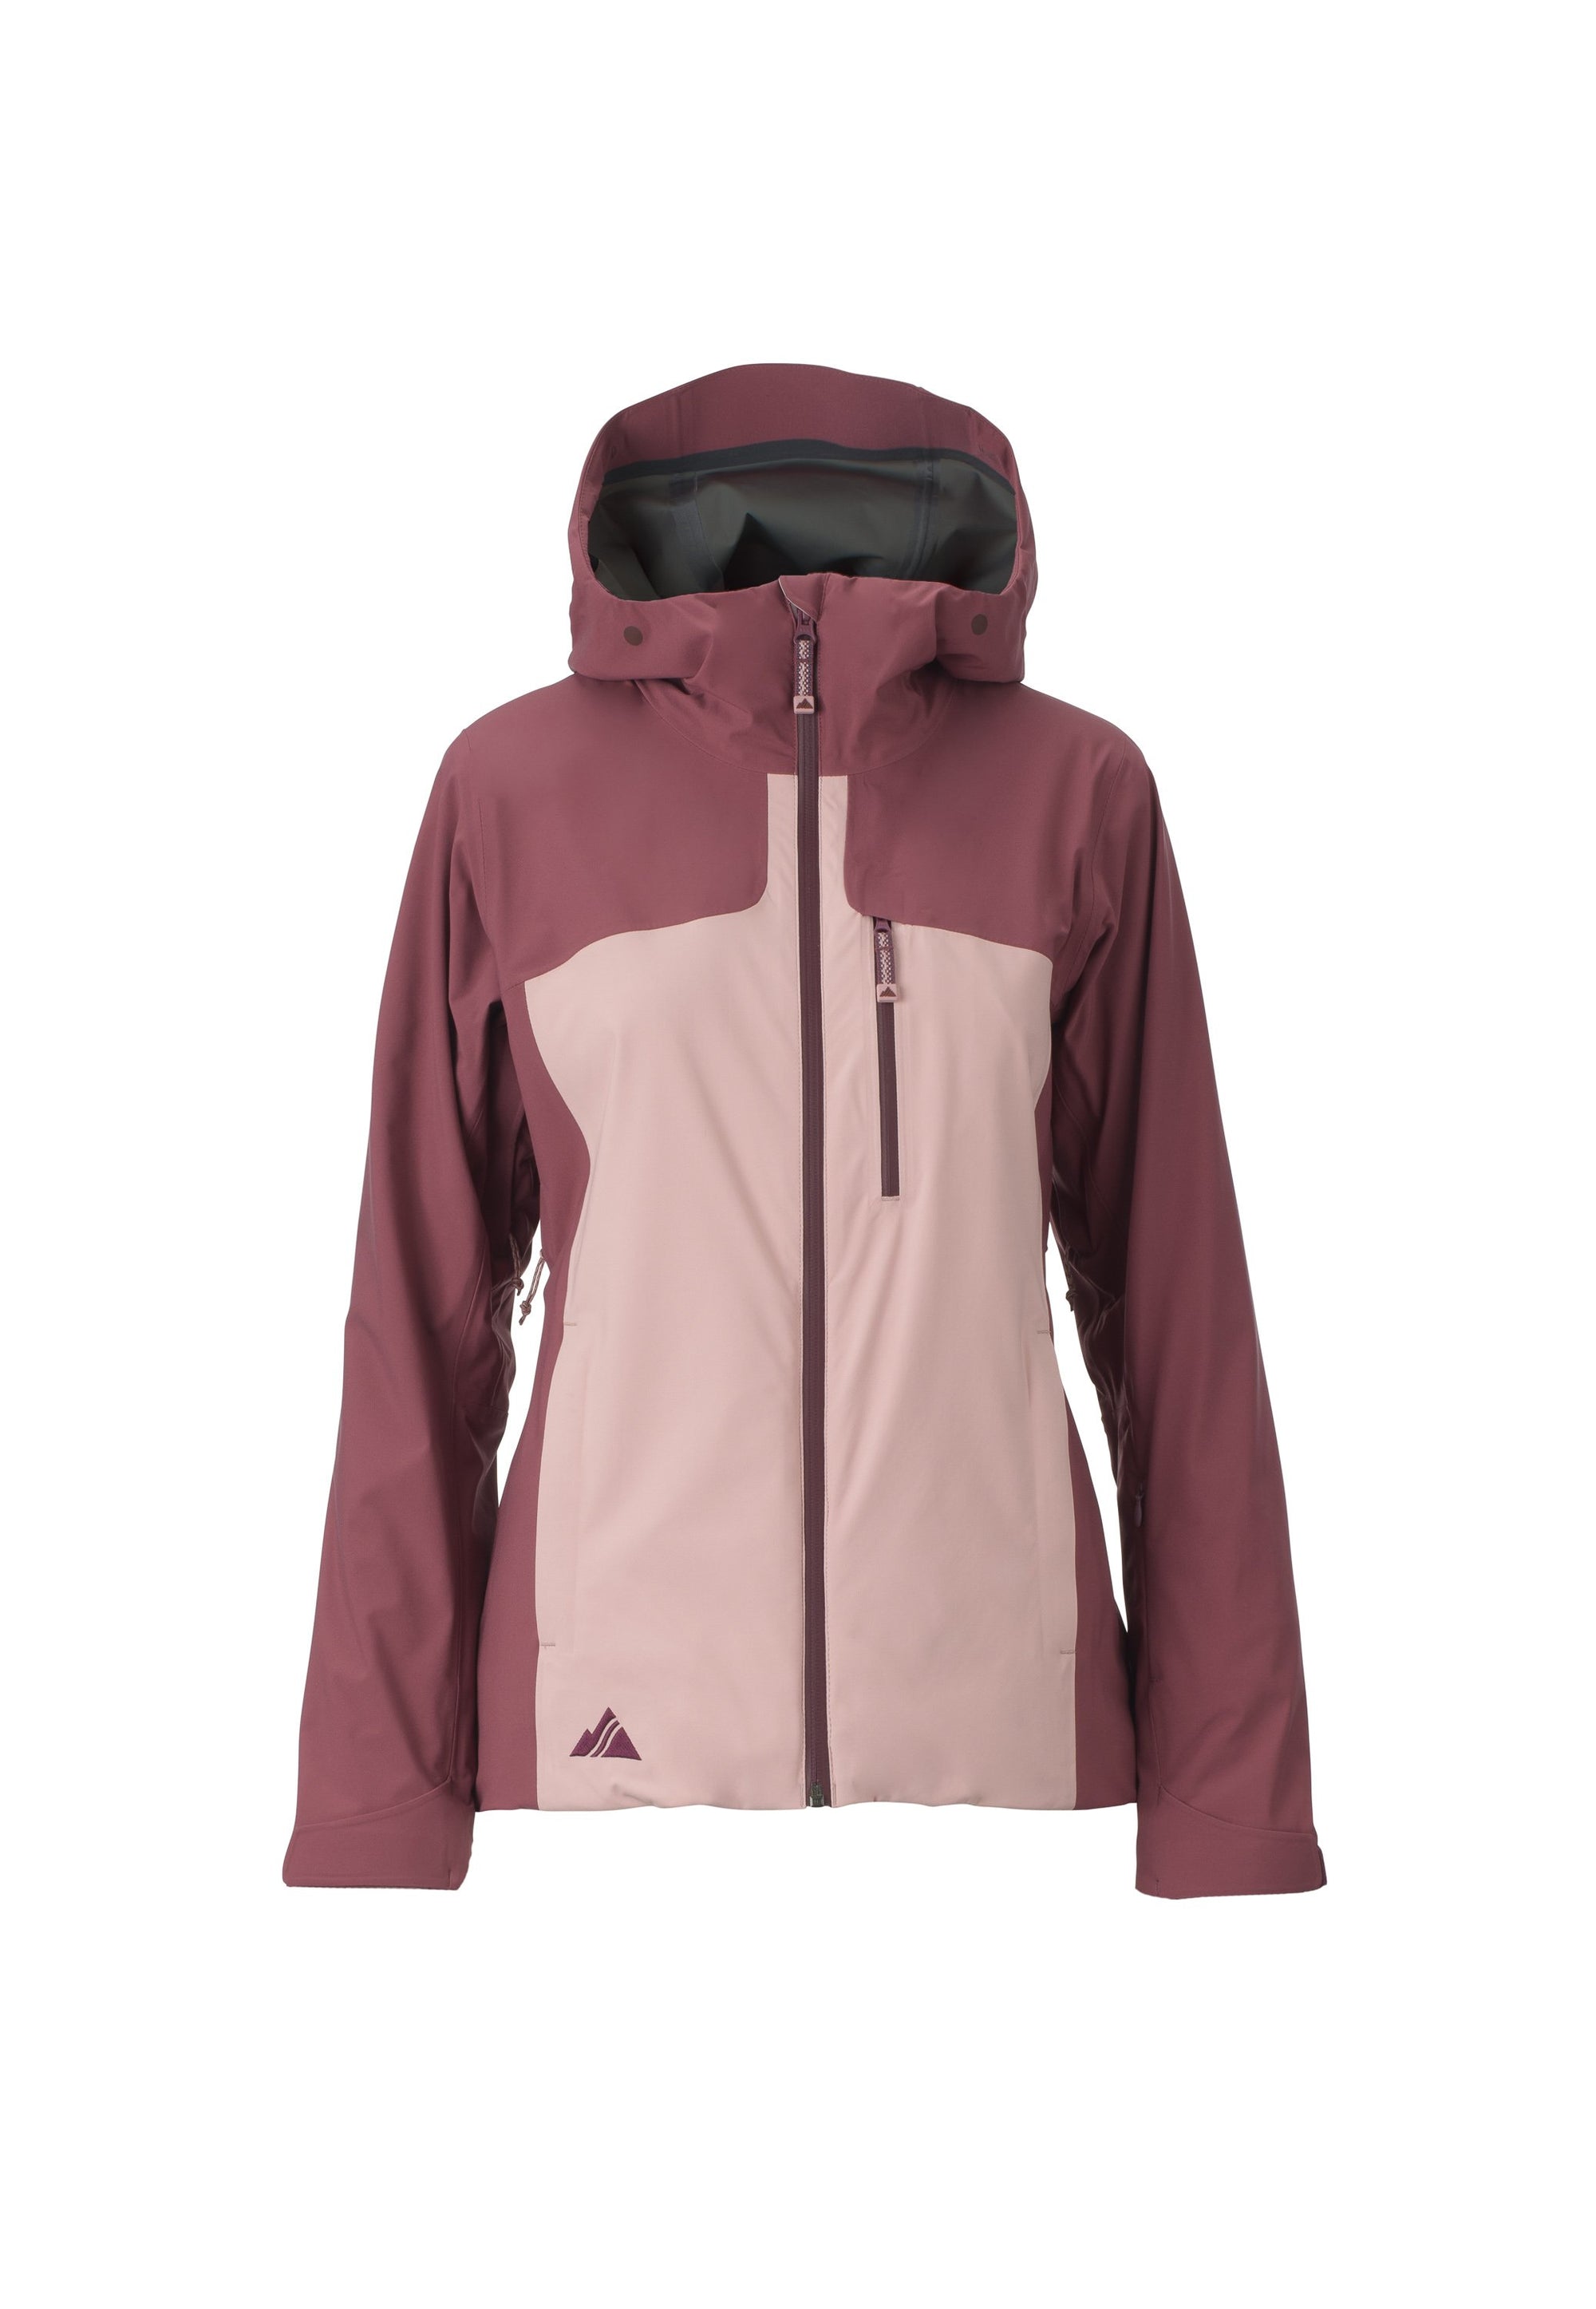 misty pink 2019 women's eden insulated skiing and snowboarding jacket from strafe outerwear